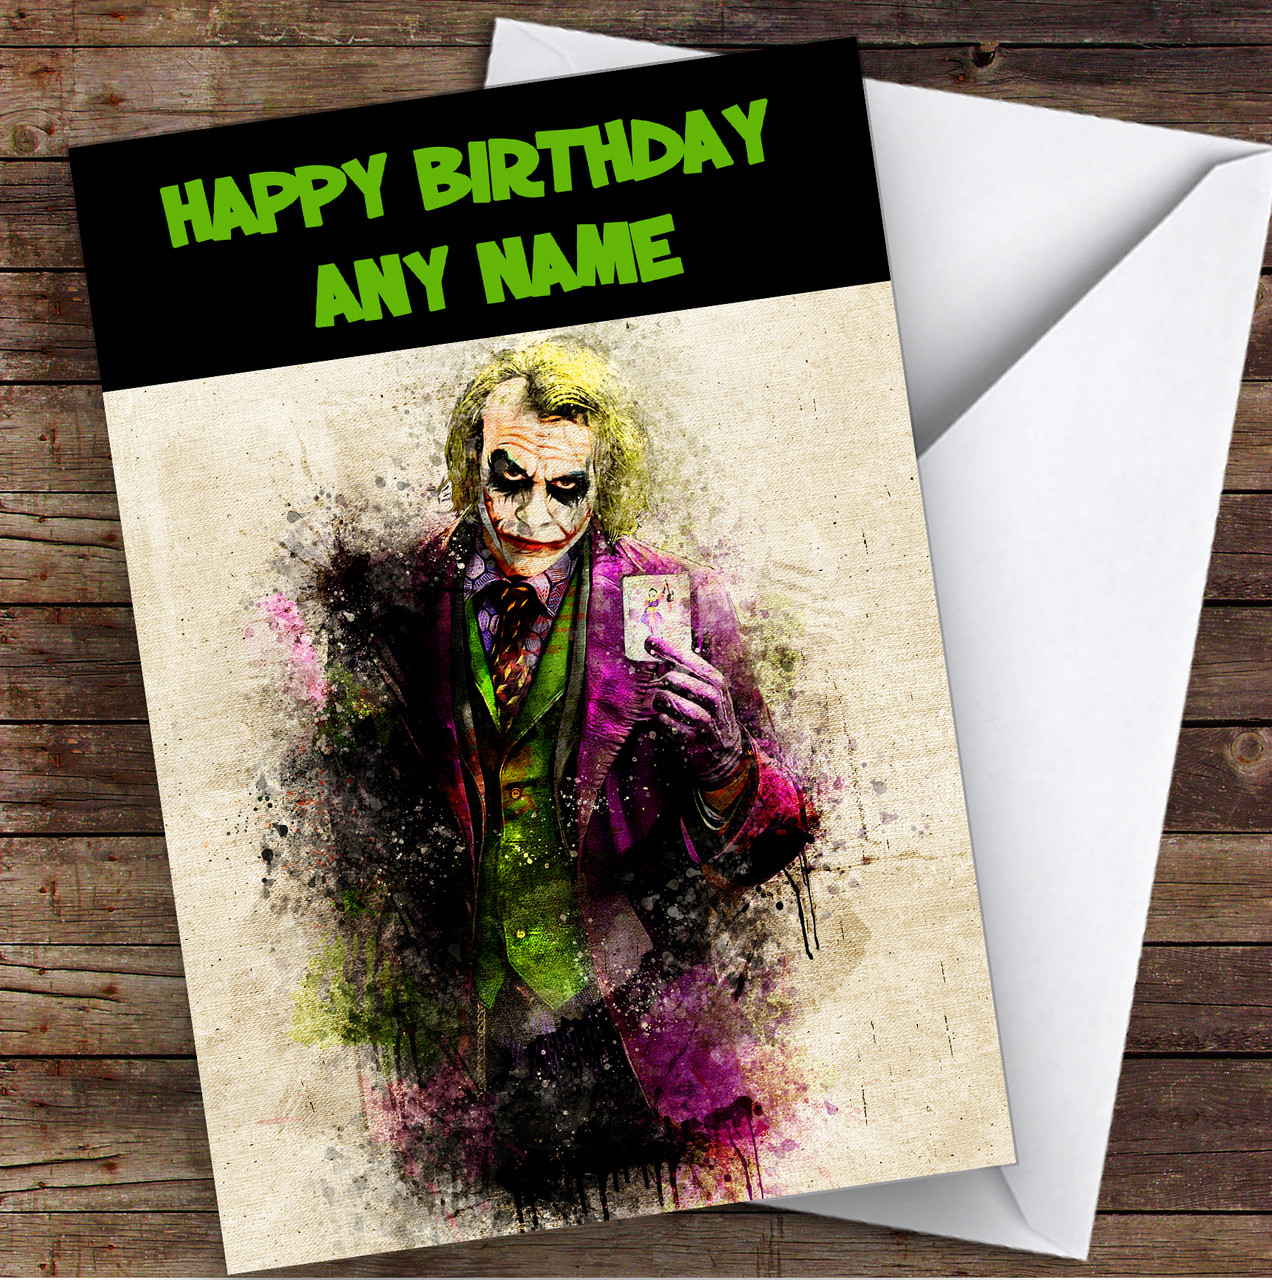 Heath Ledger's Birthday: Late Actor Would Have Turned 34 Today | HuffPost Entertainment